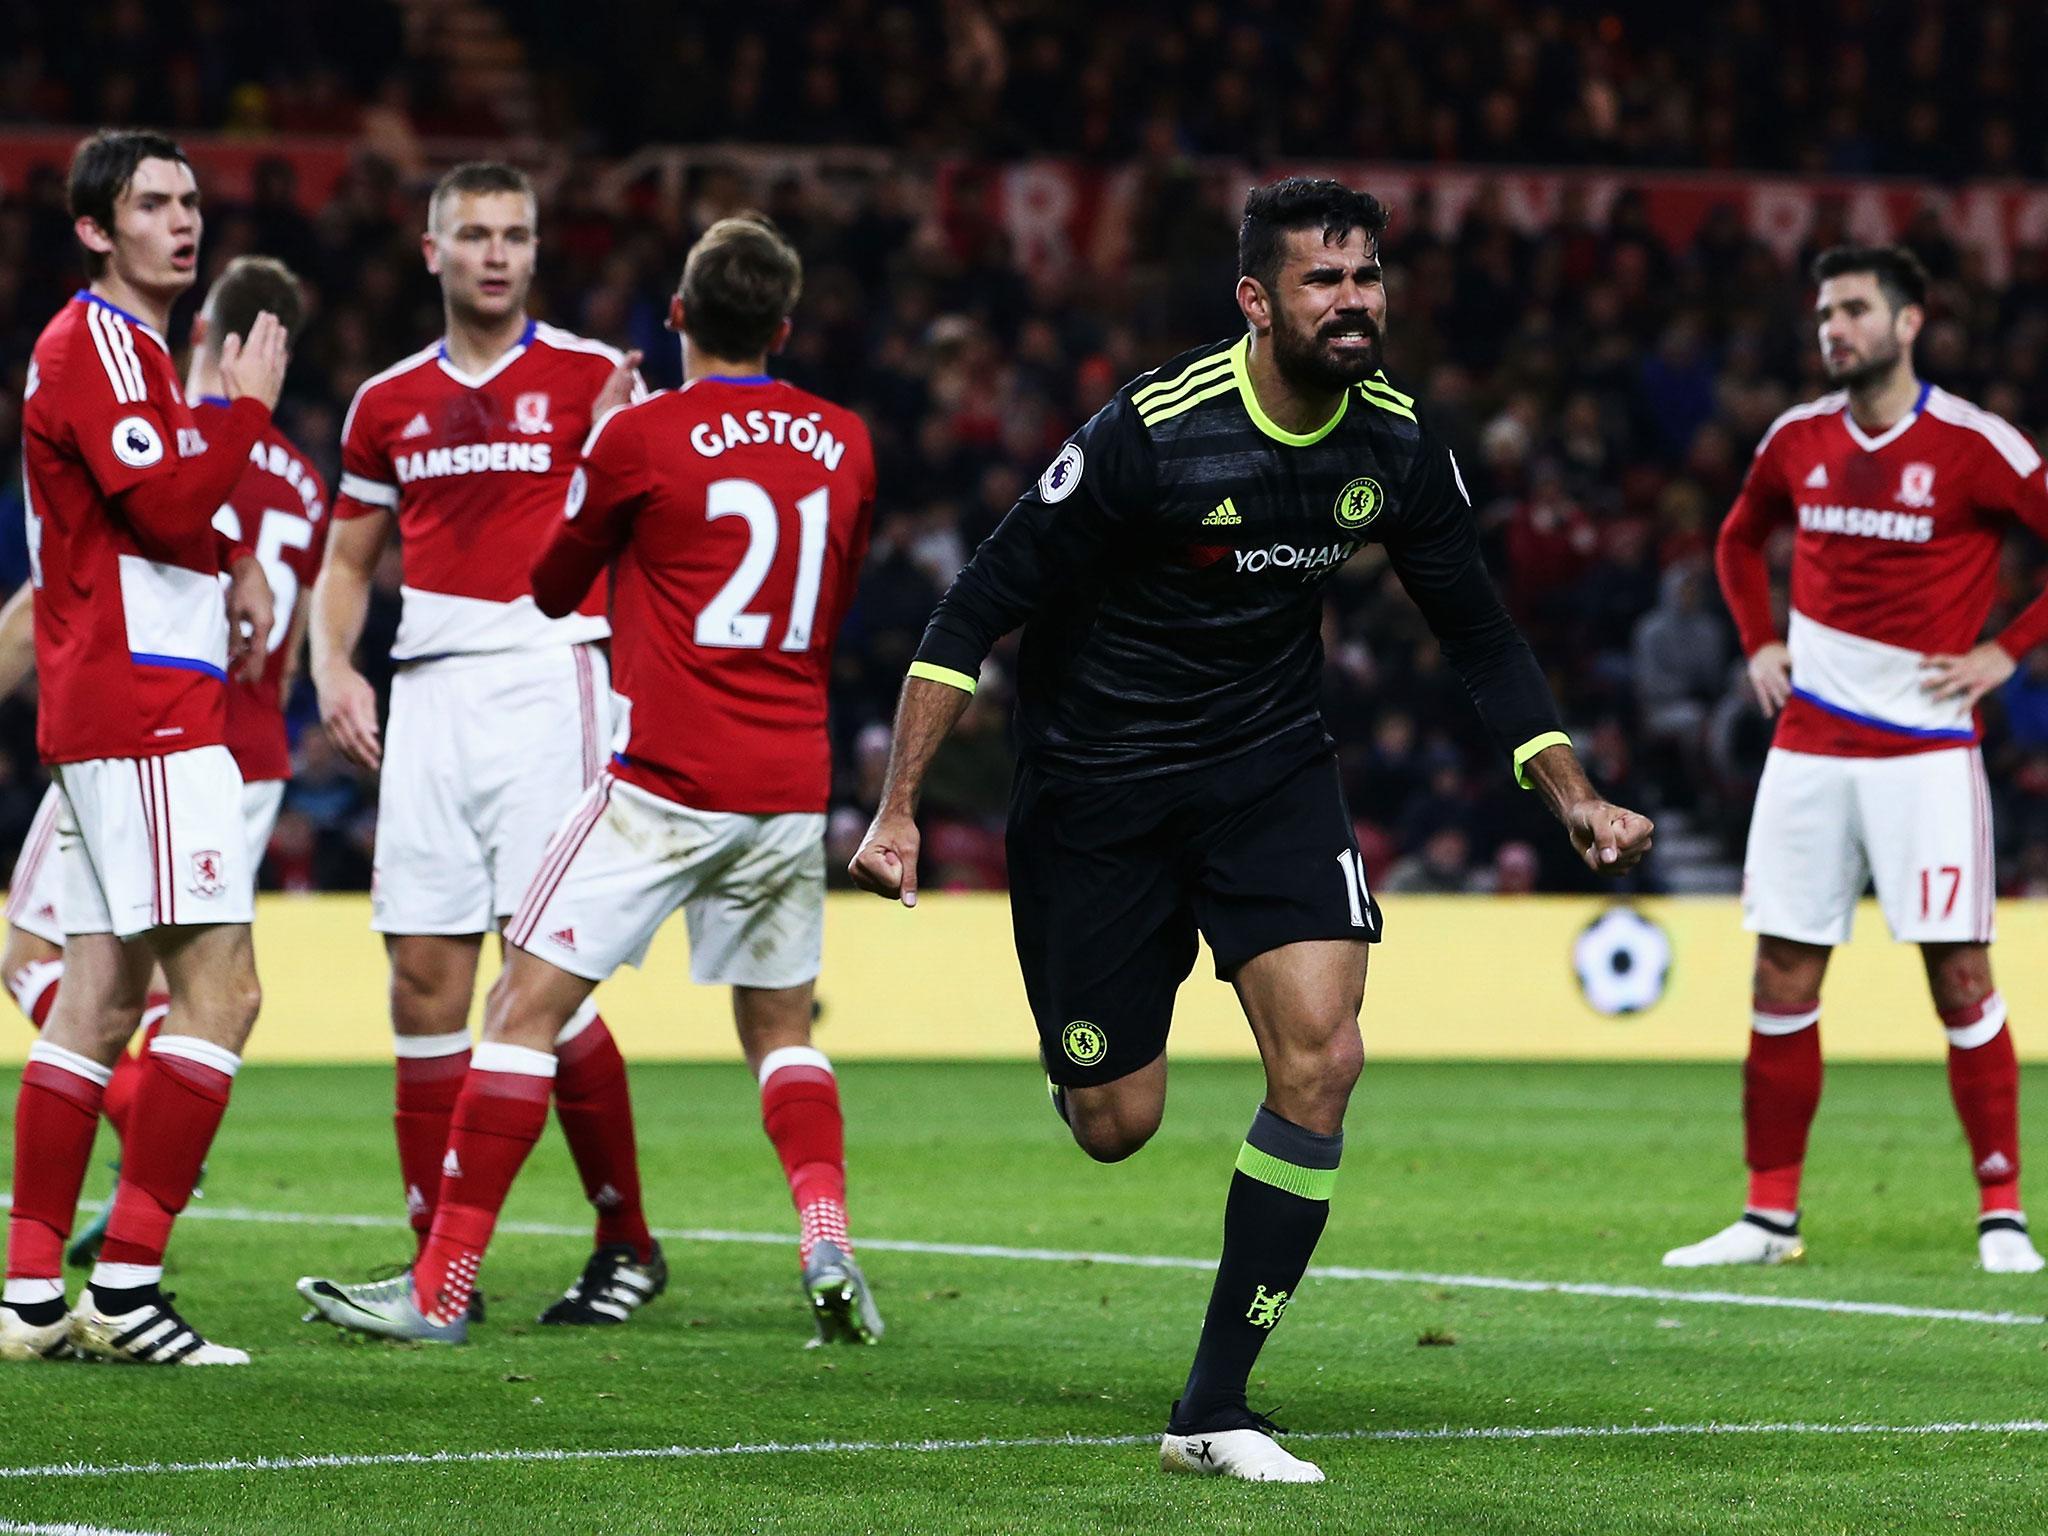 Chelsea face Middlesbrough as they close in on the title